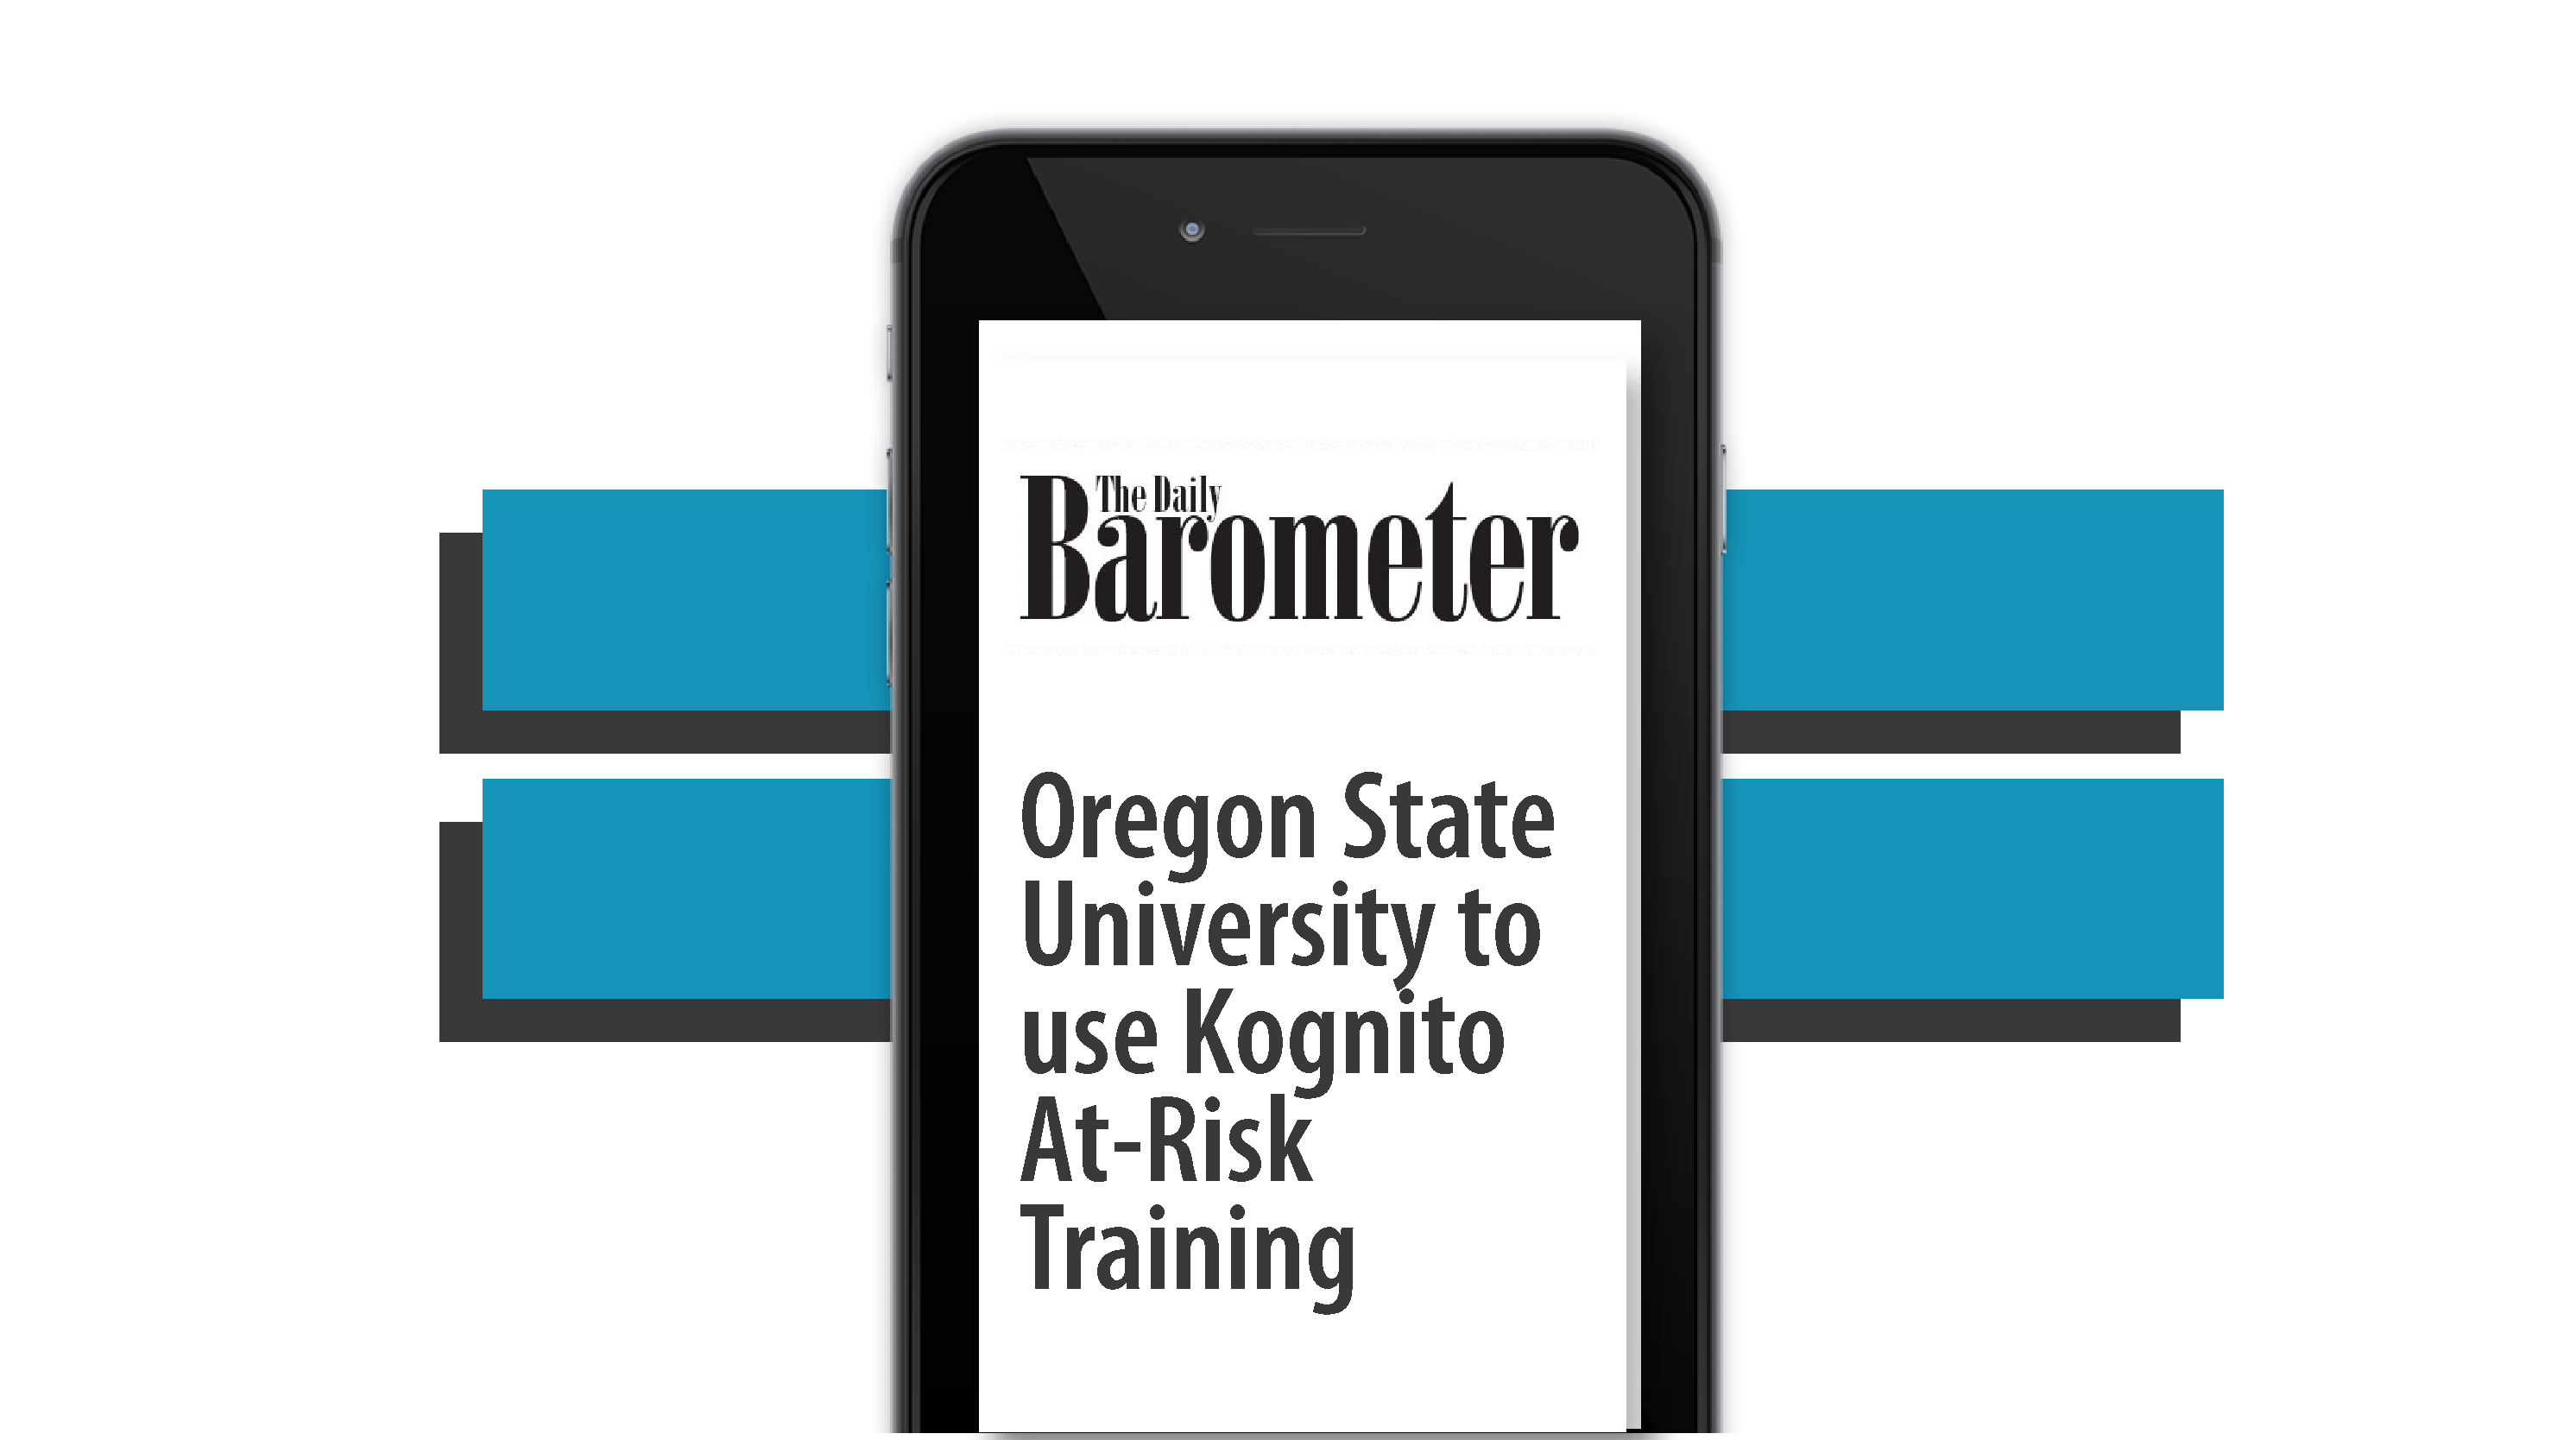 Kognito at Oregon State University in The Daily Barometer